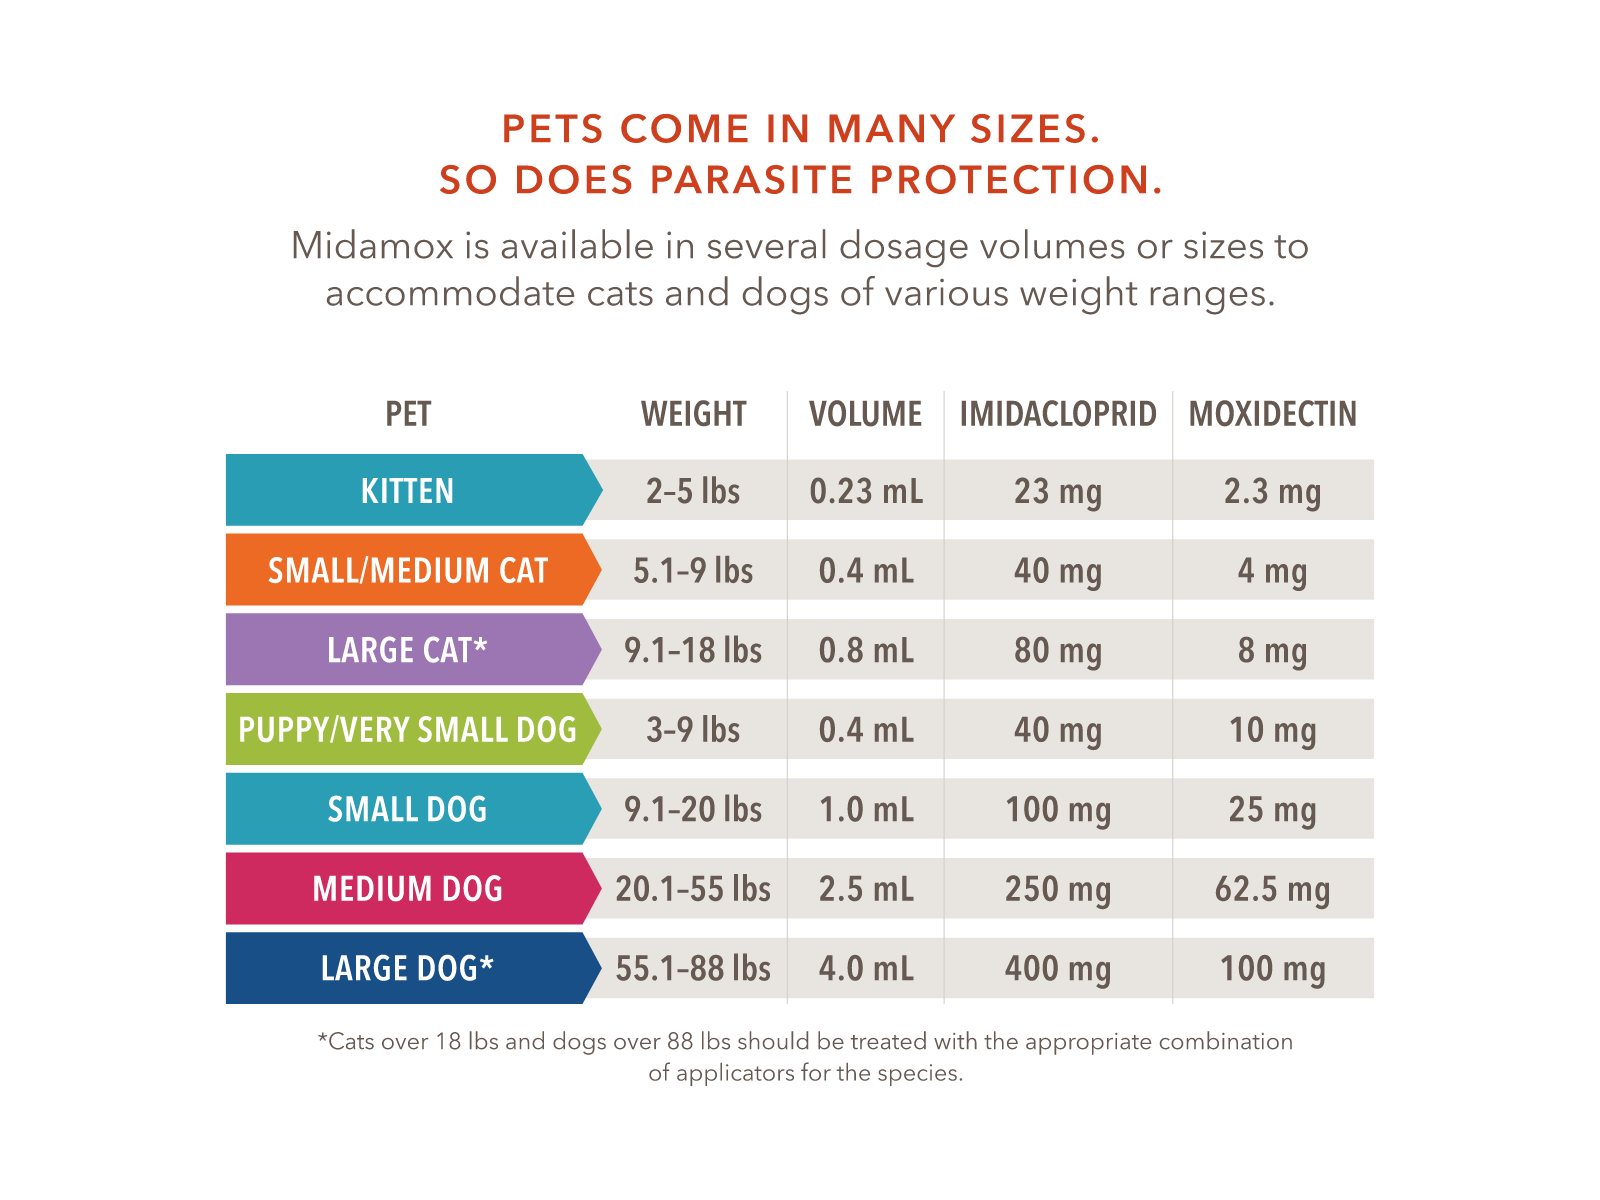 Midamox is available in several dosage sizes for cats and dogs